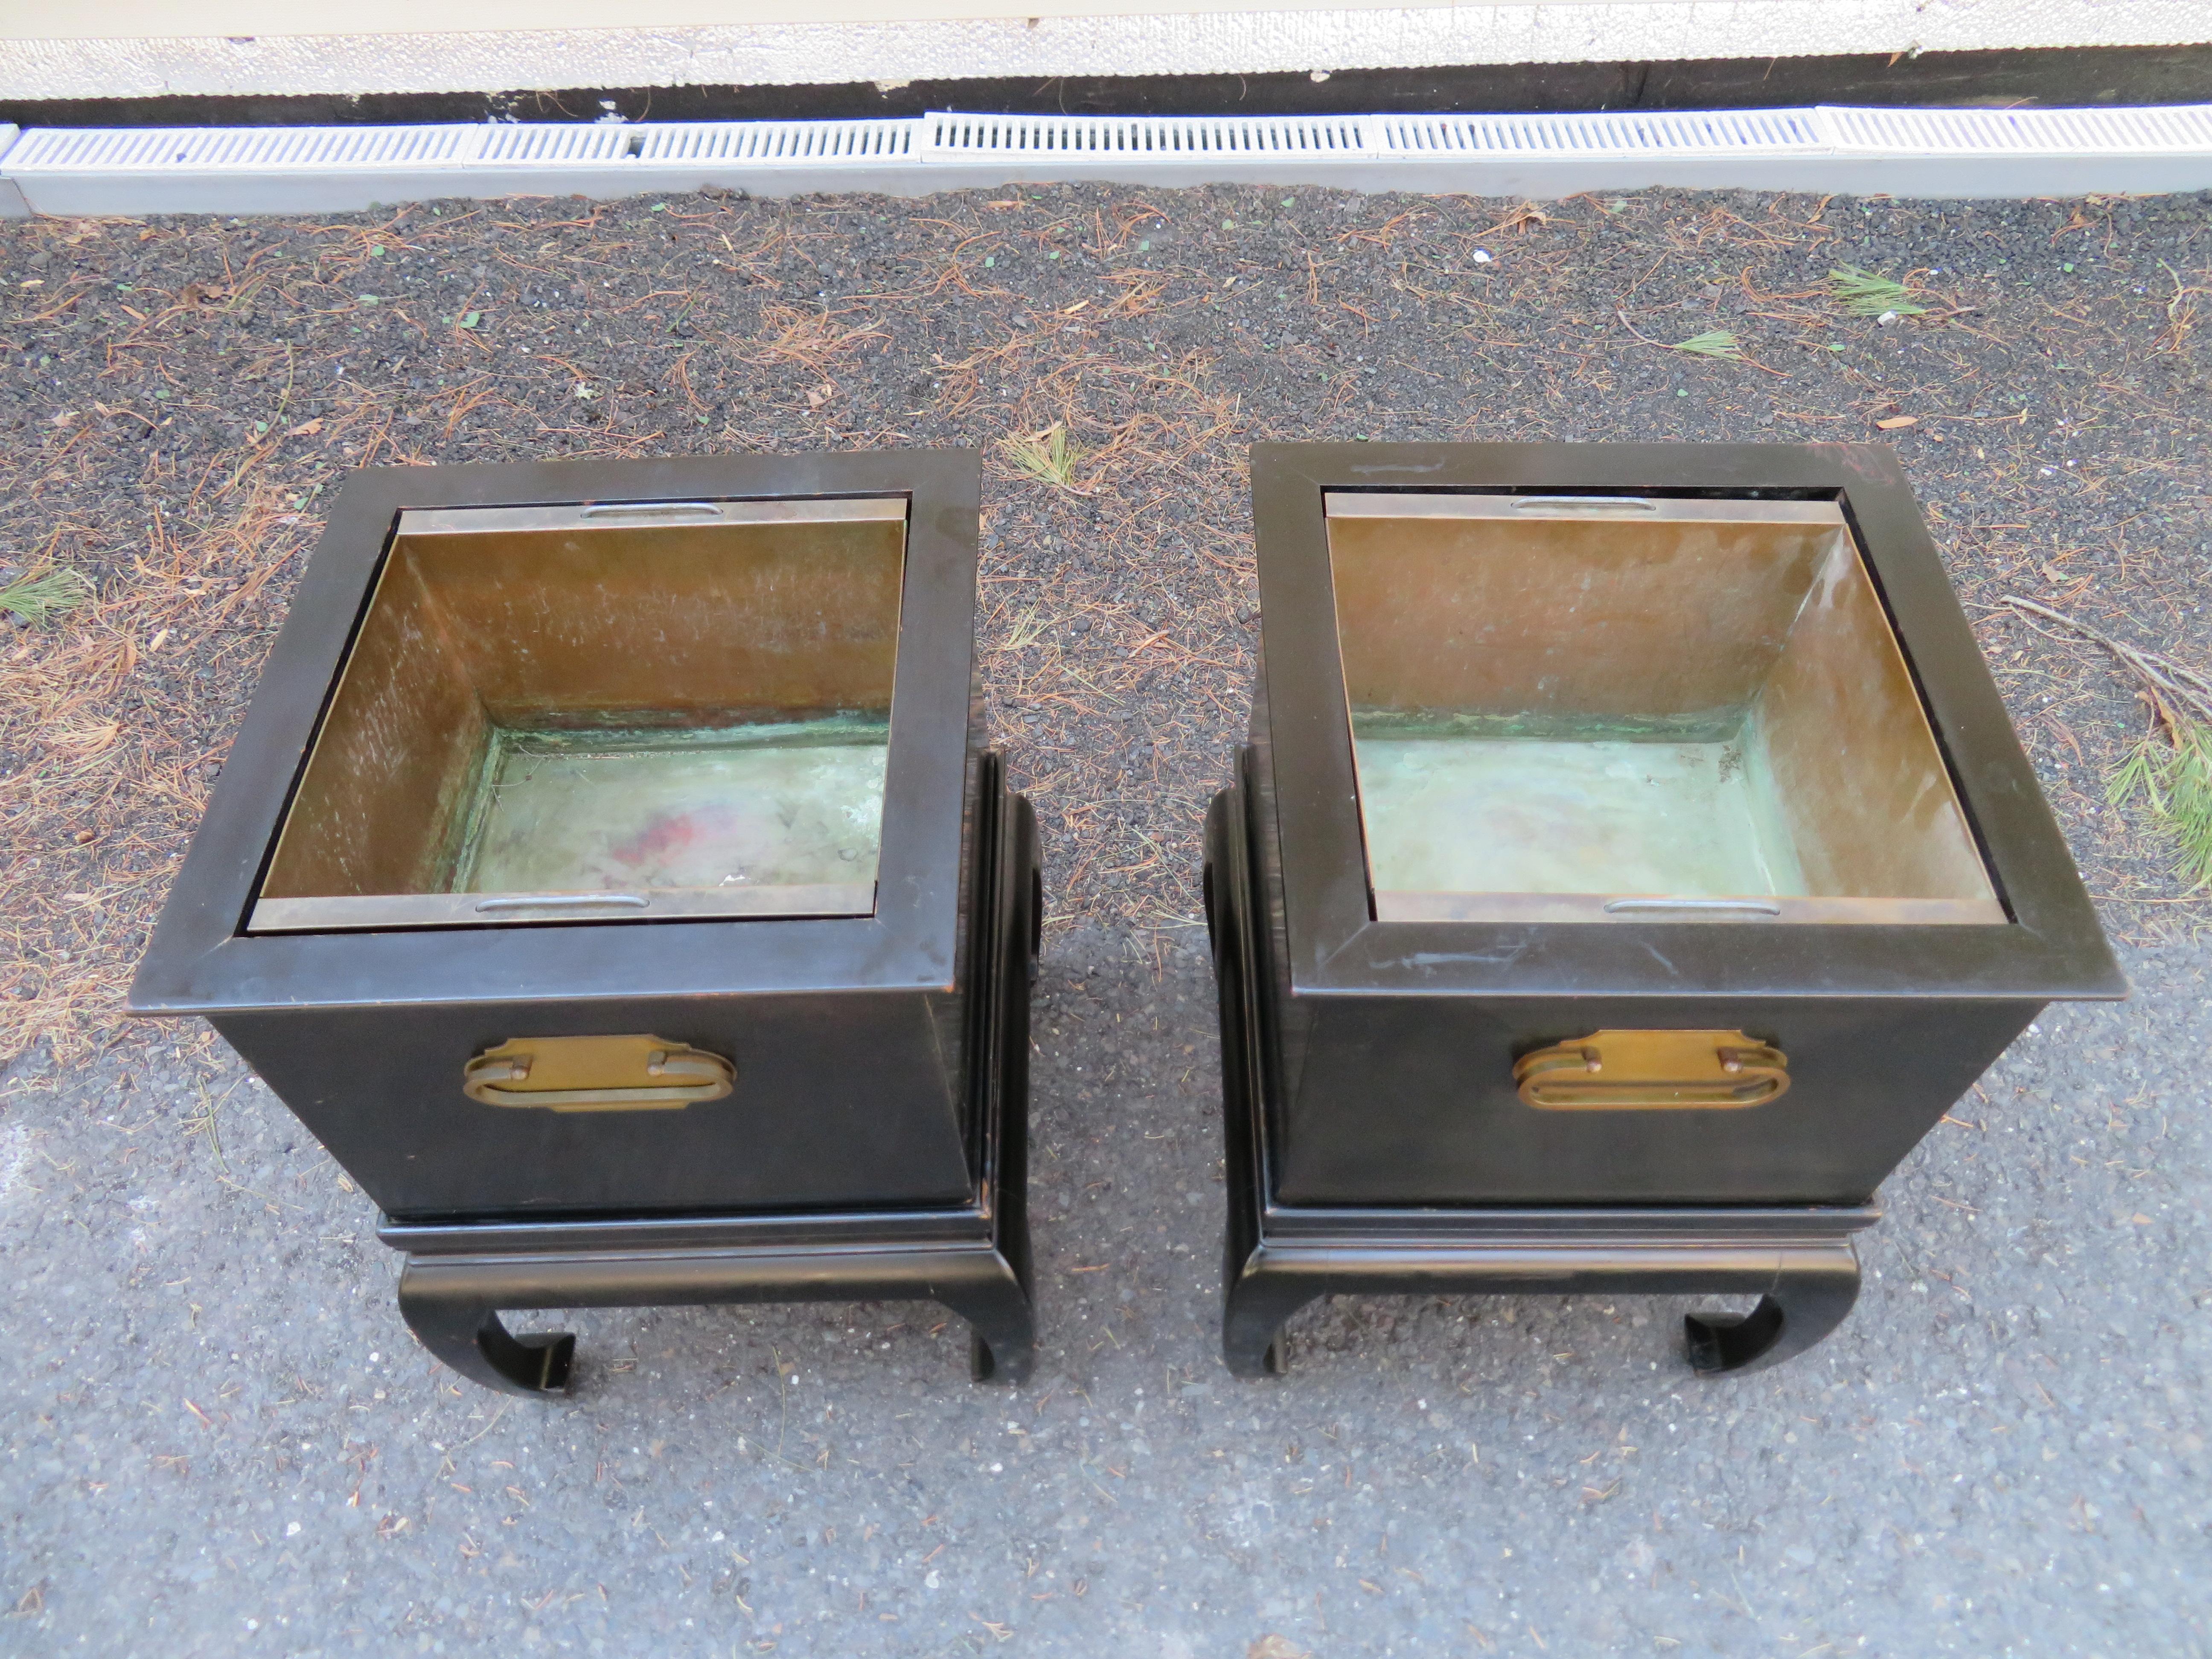 Handsome Asian Modern pair black lacquer and brass planters with copper inserts on hoof foot style removable bases. These pieces are in nice vintage condition with time worn aged patina. The legs and top edges have a little more patina than the rest